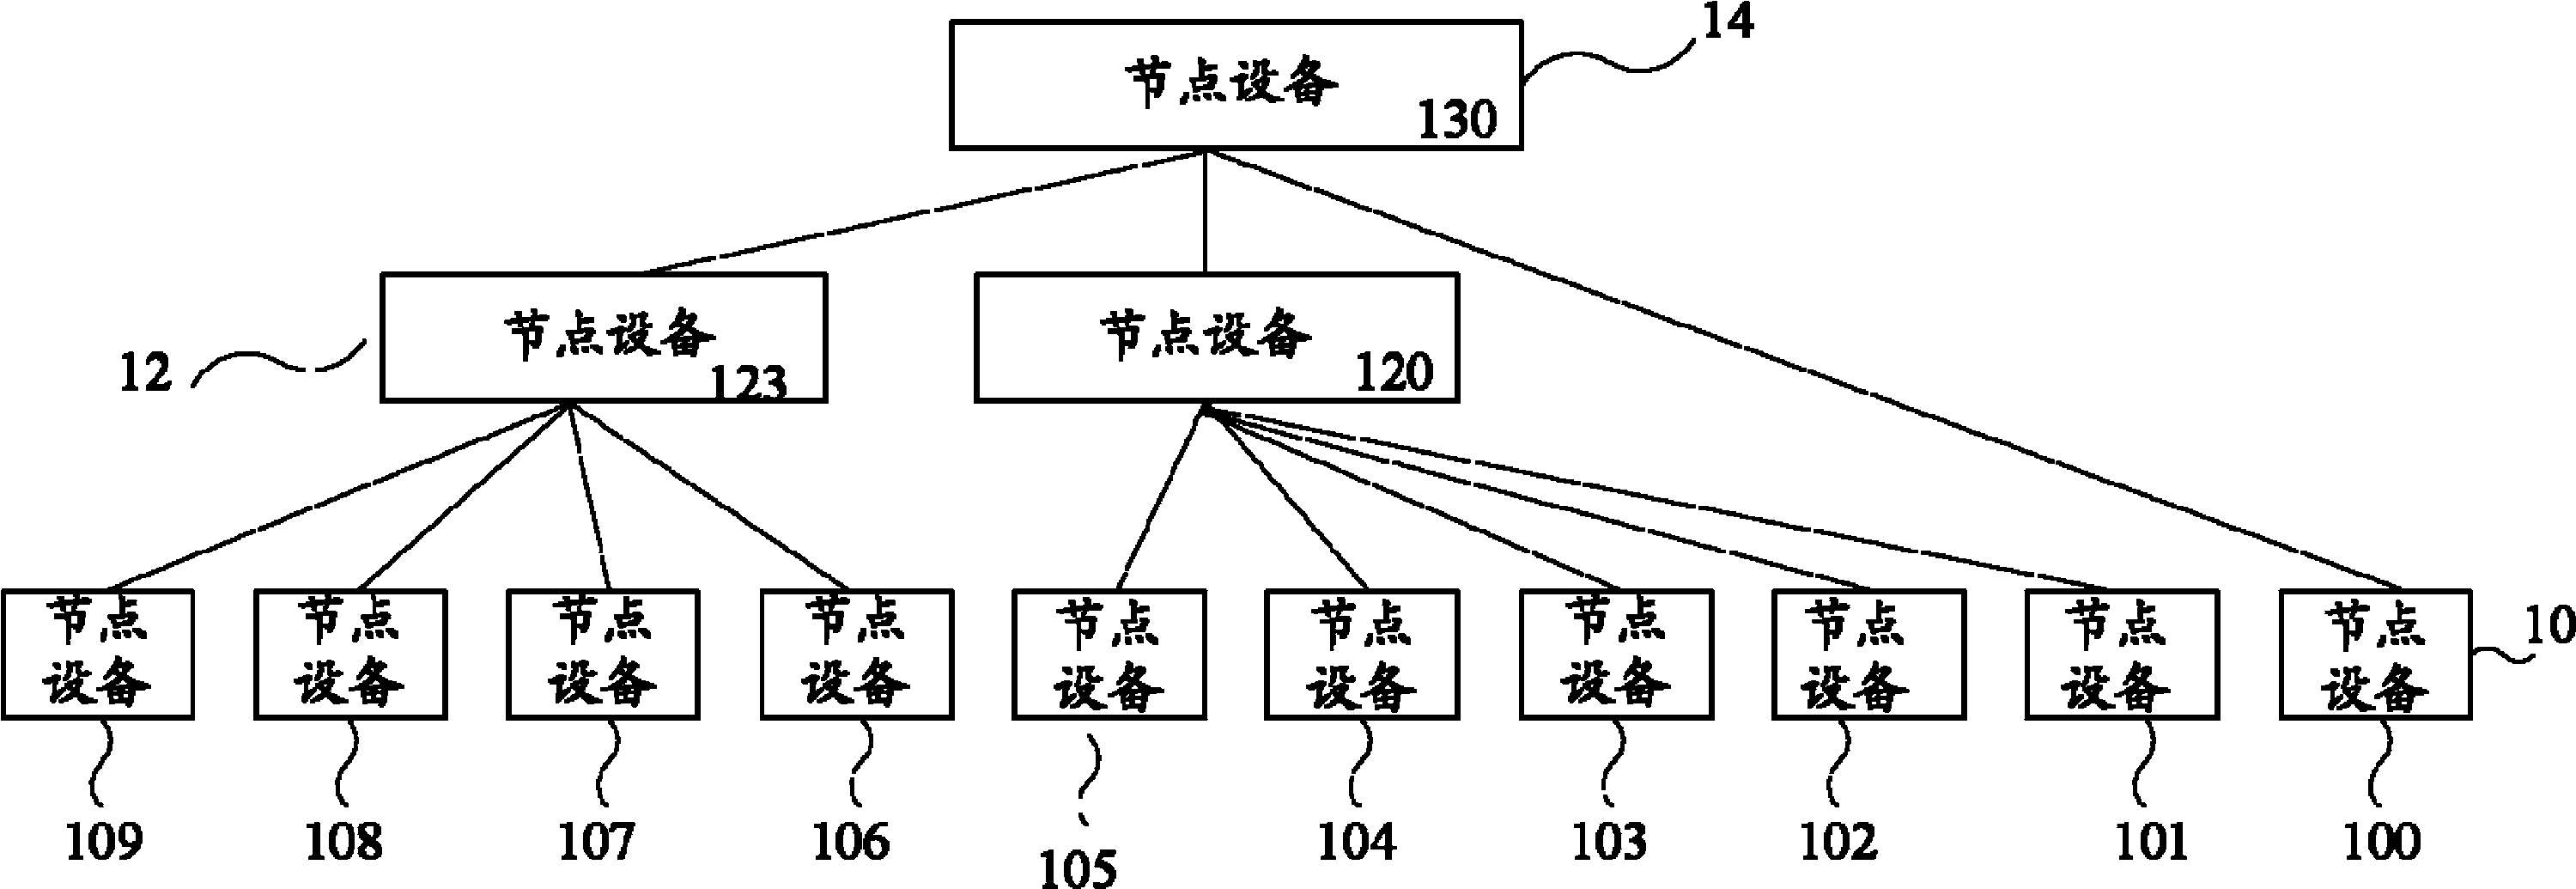 Method and system for monitoring transaction data processing of online transaction system in real time